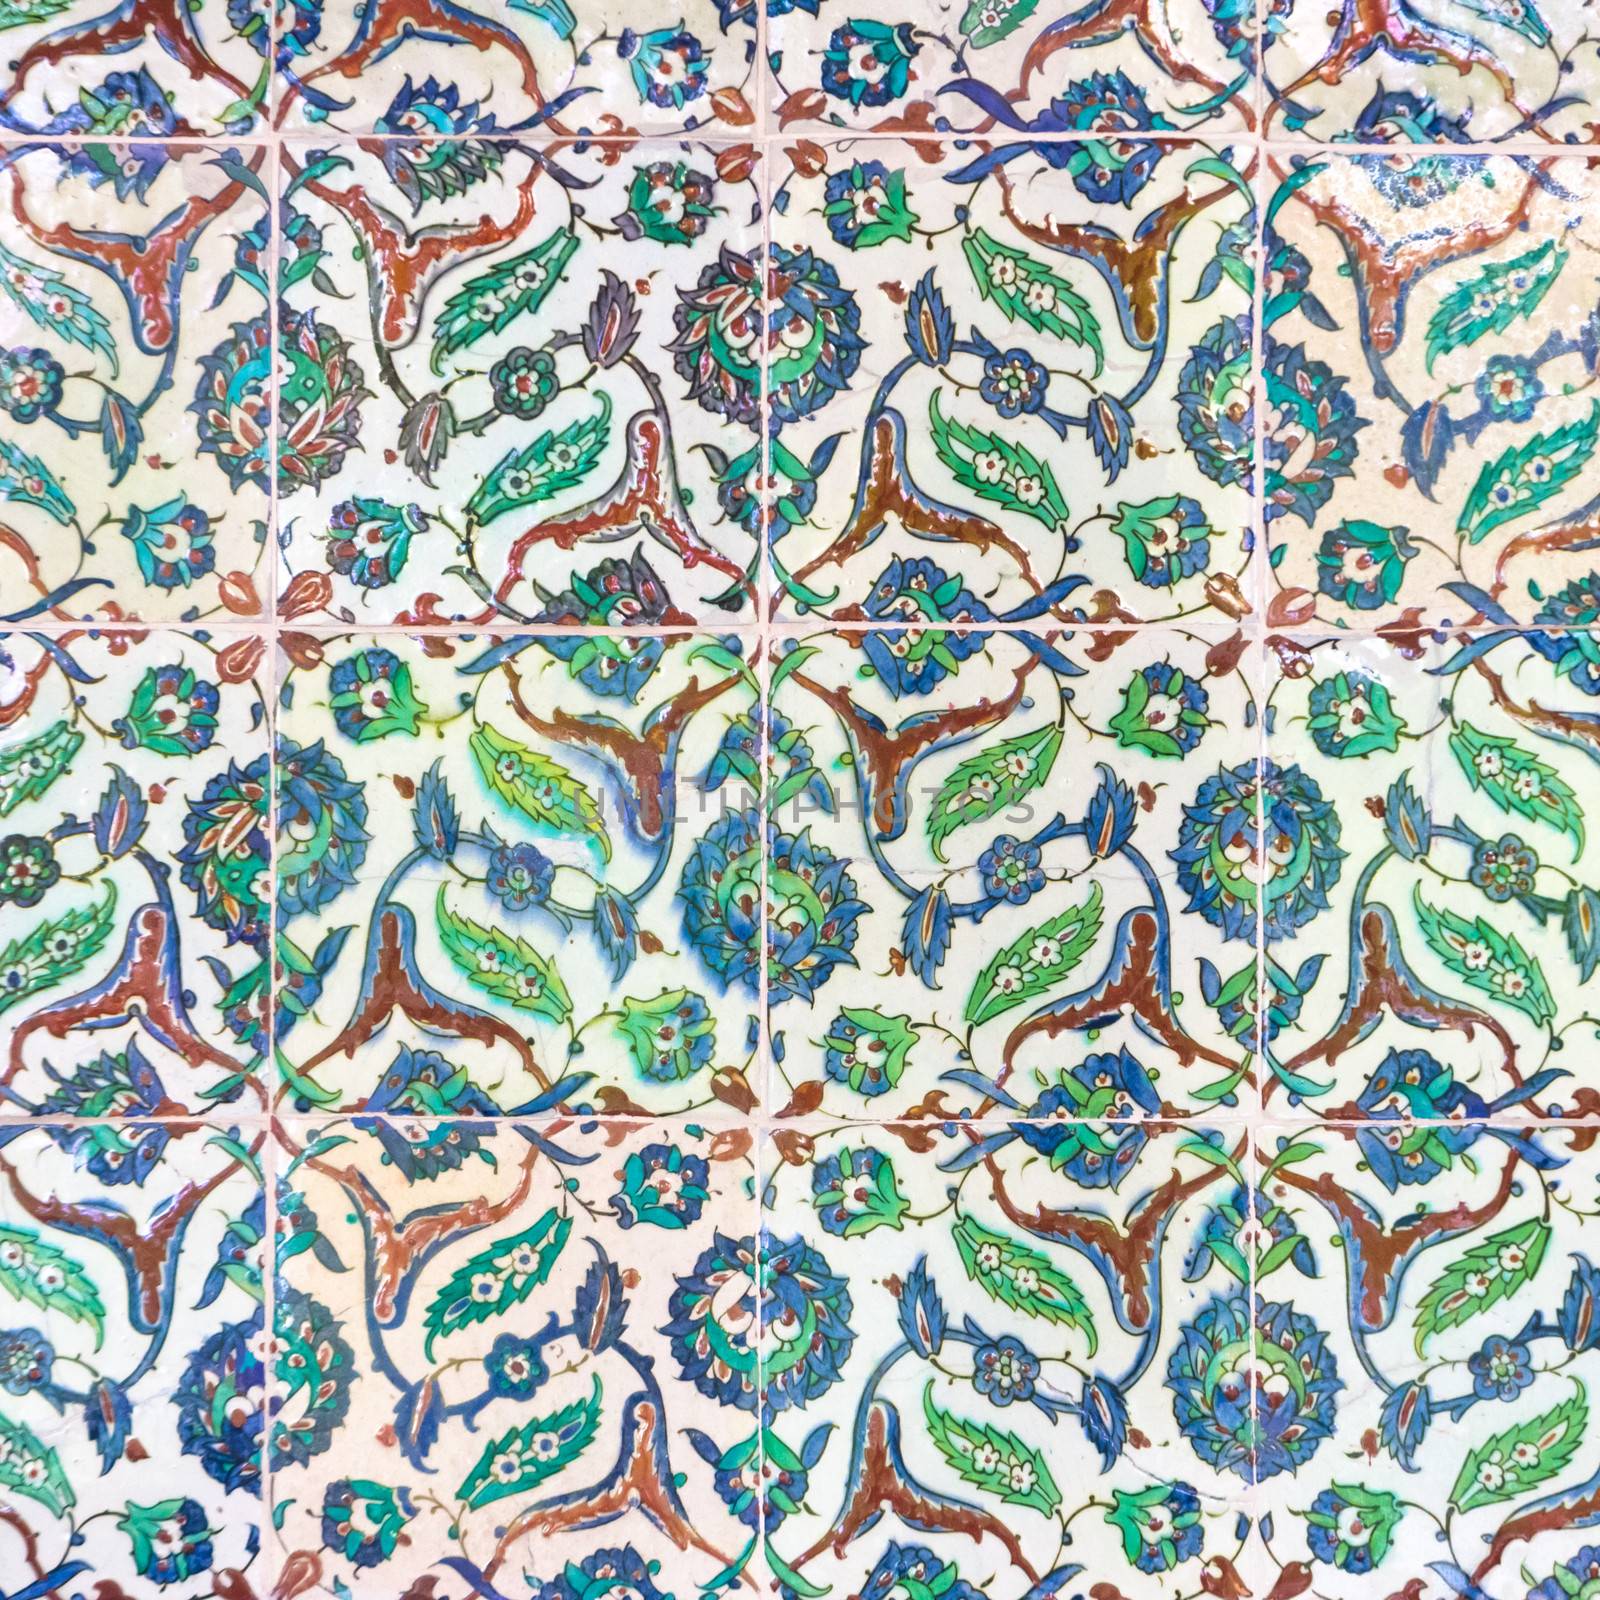 Oriental mosaic detail in  The Topkapi Palace, a large palace in Istanbul, Turkey, that was the primary residence of the Ottoman Sultans.